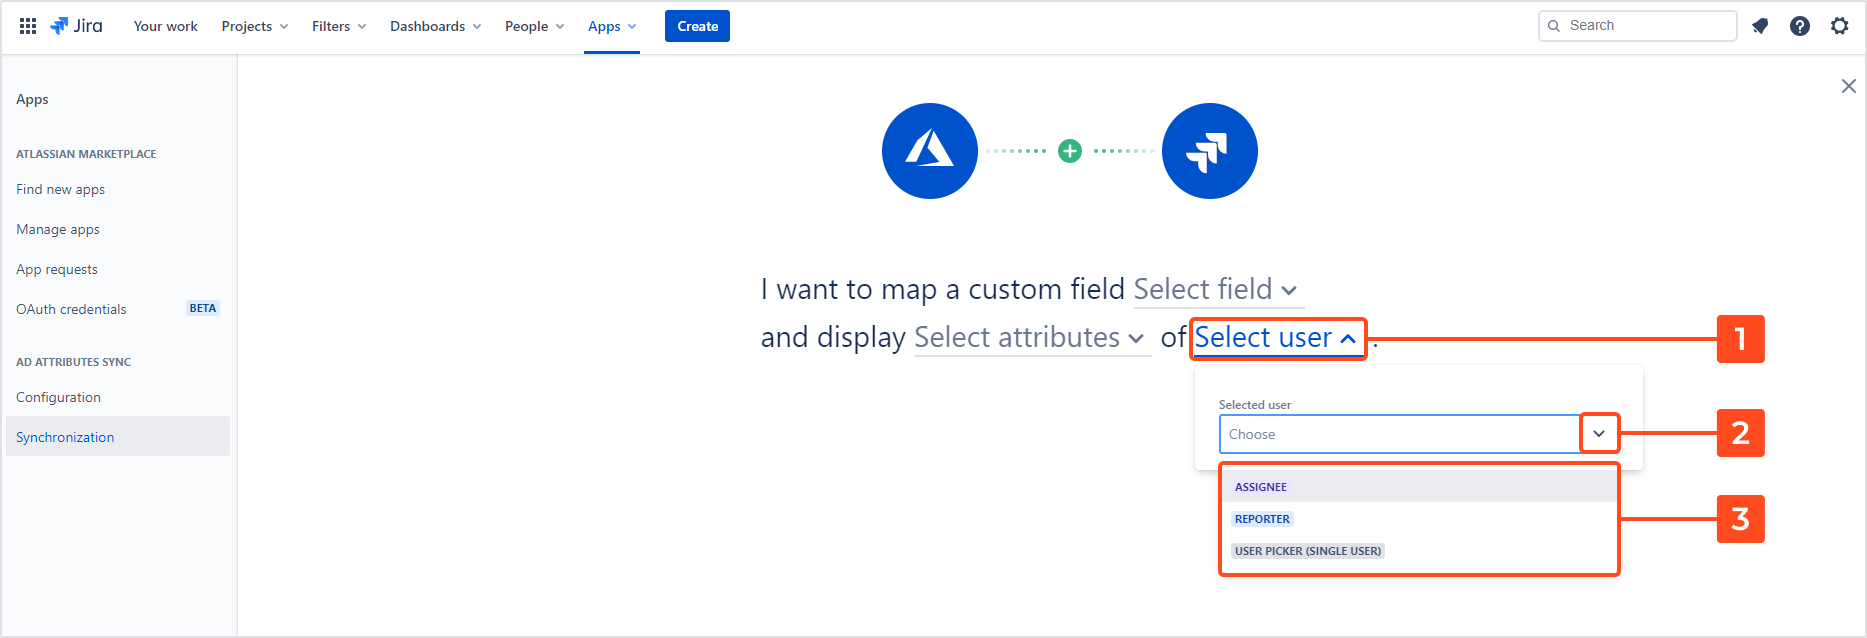 Jira Active Directory integration with Azure AD Attributes - Mapping Azure AD data to a custom field: Select user